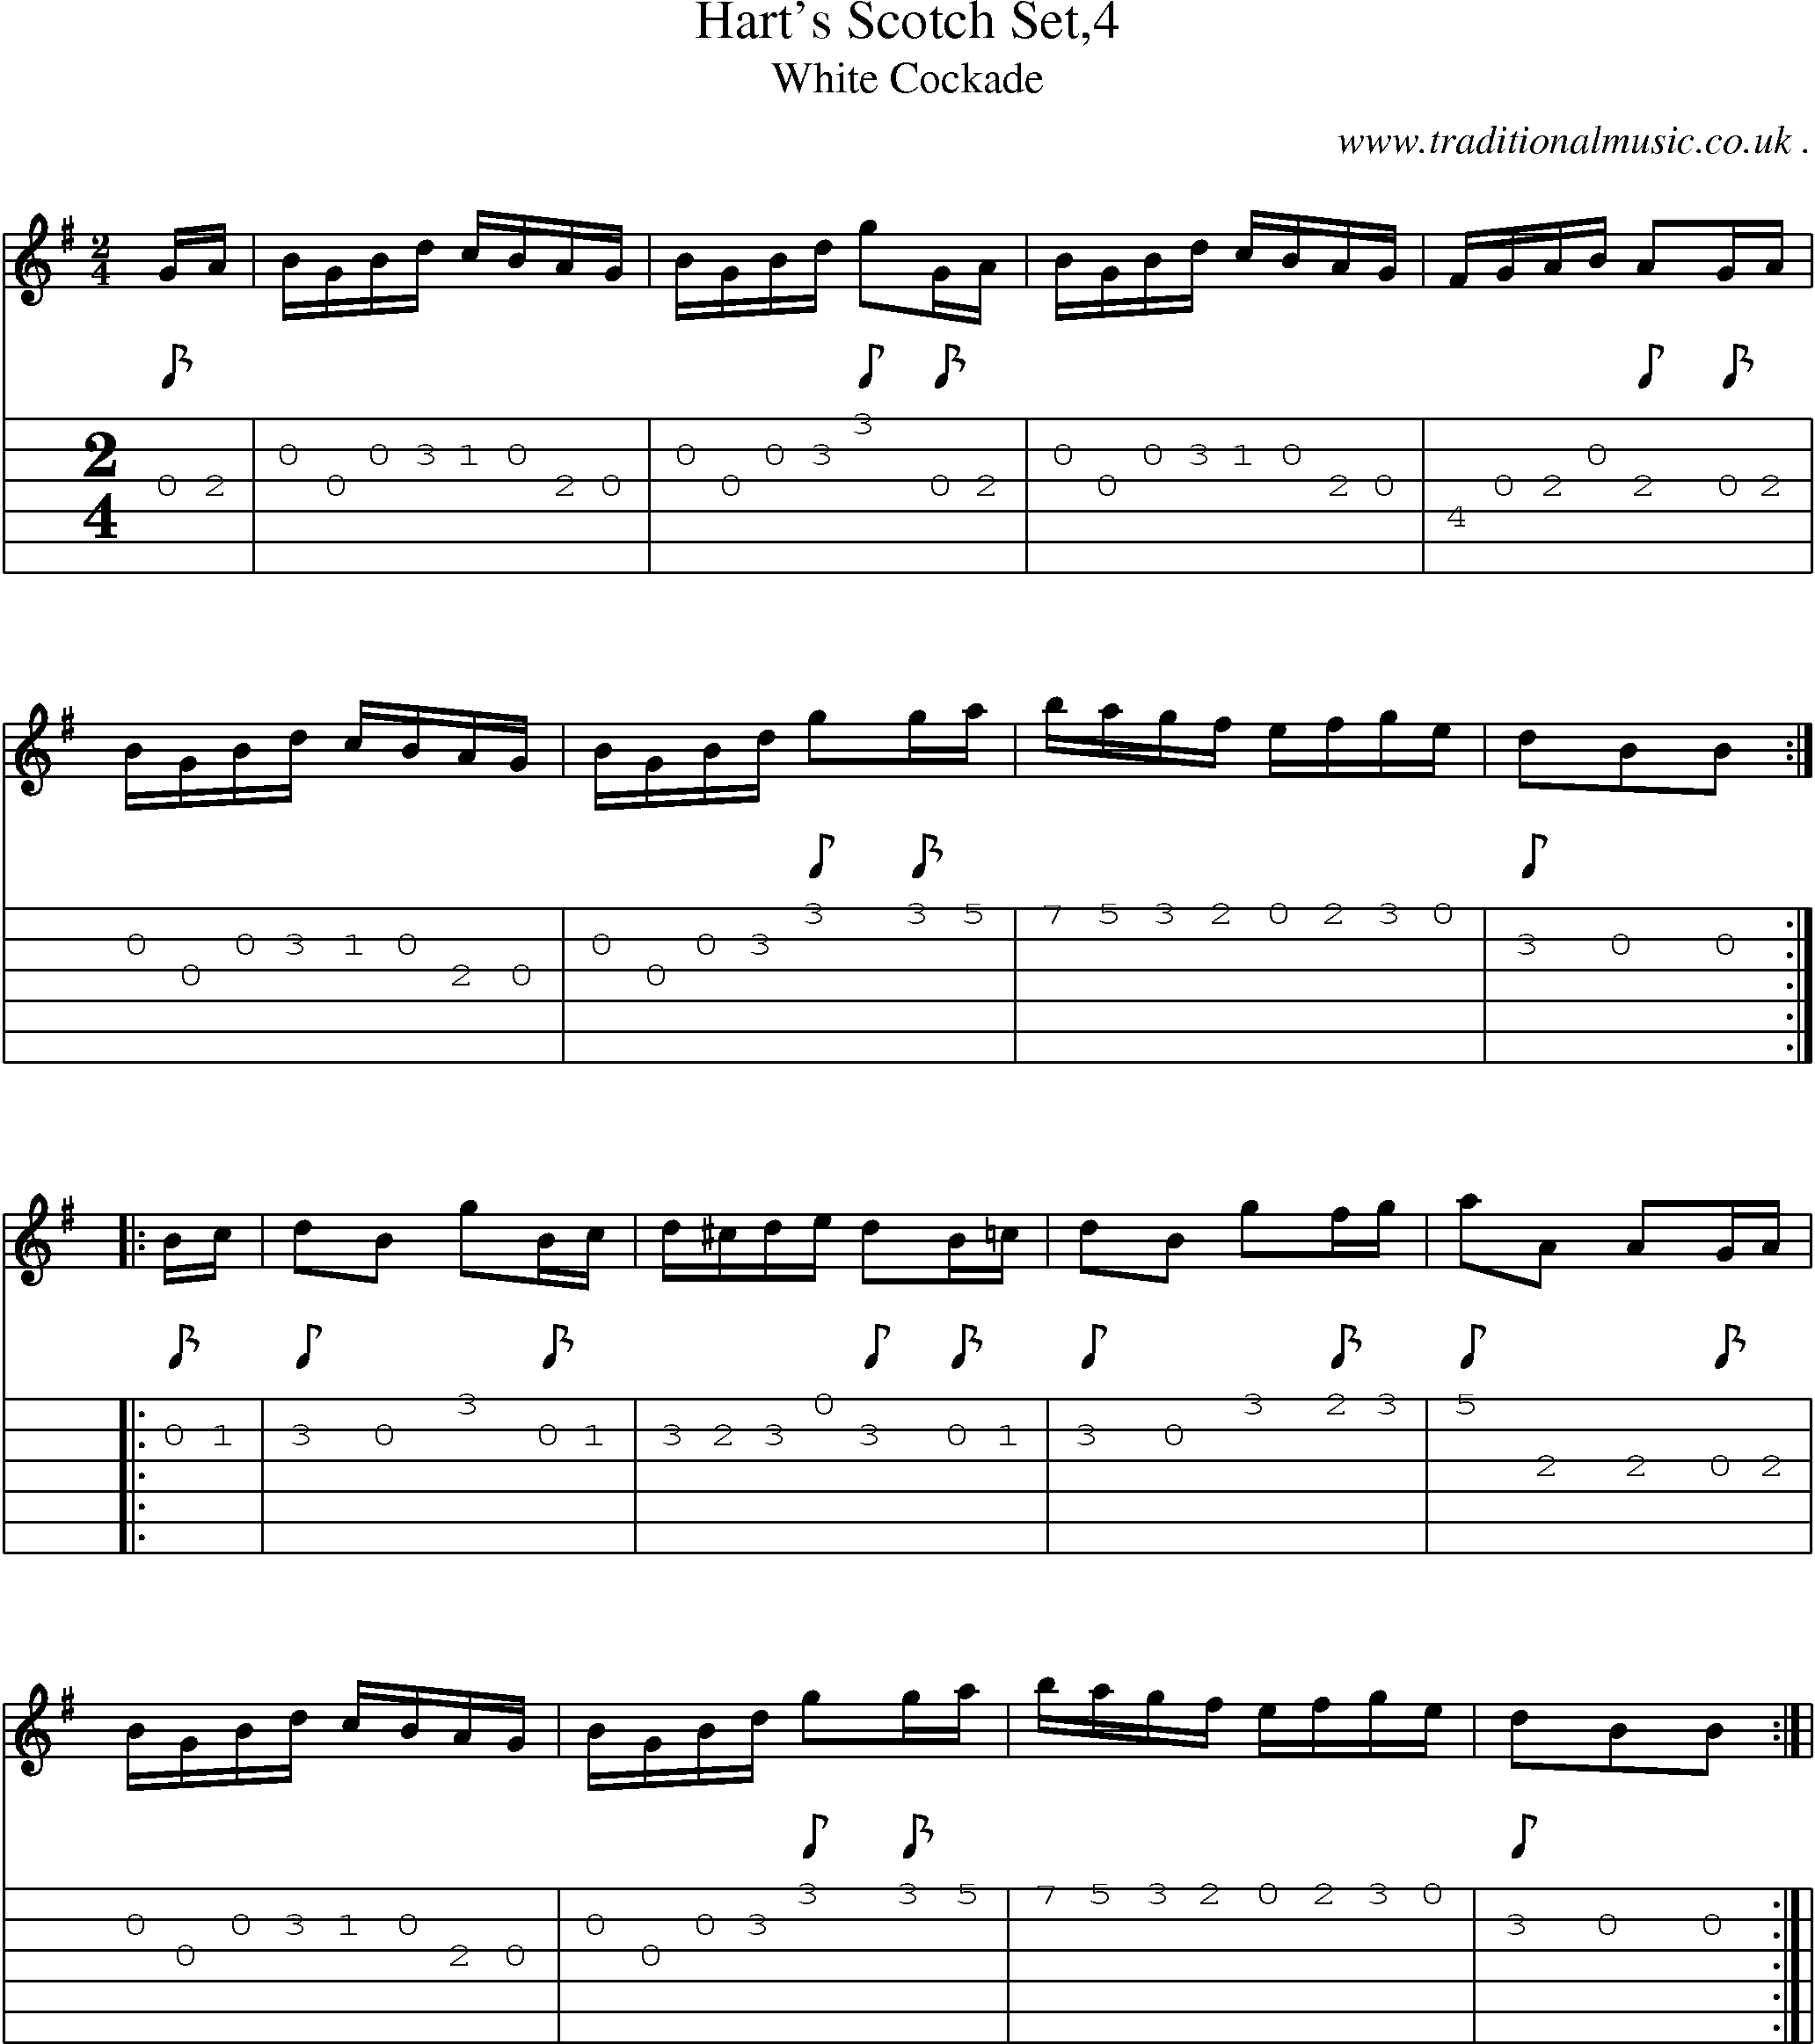 Sheet-Music and Guitar Tabs for Harts Scotch Set4